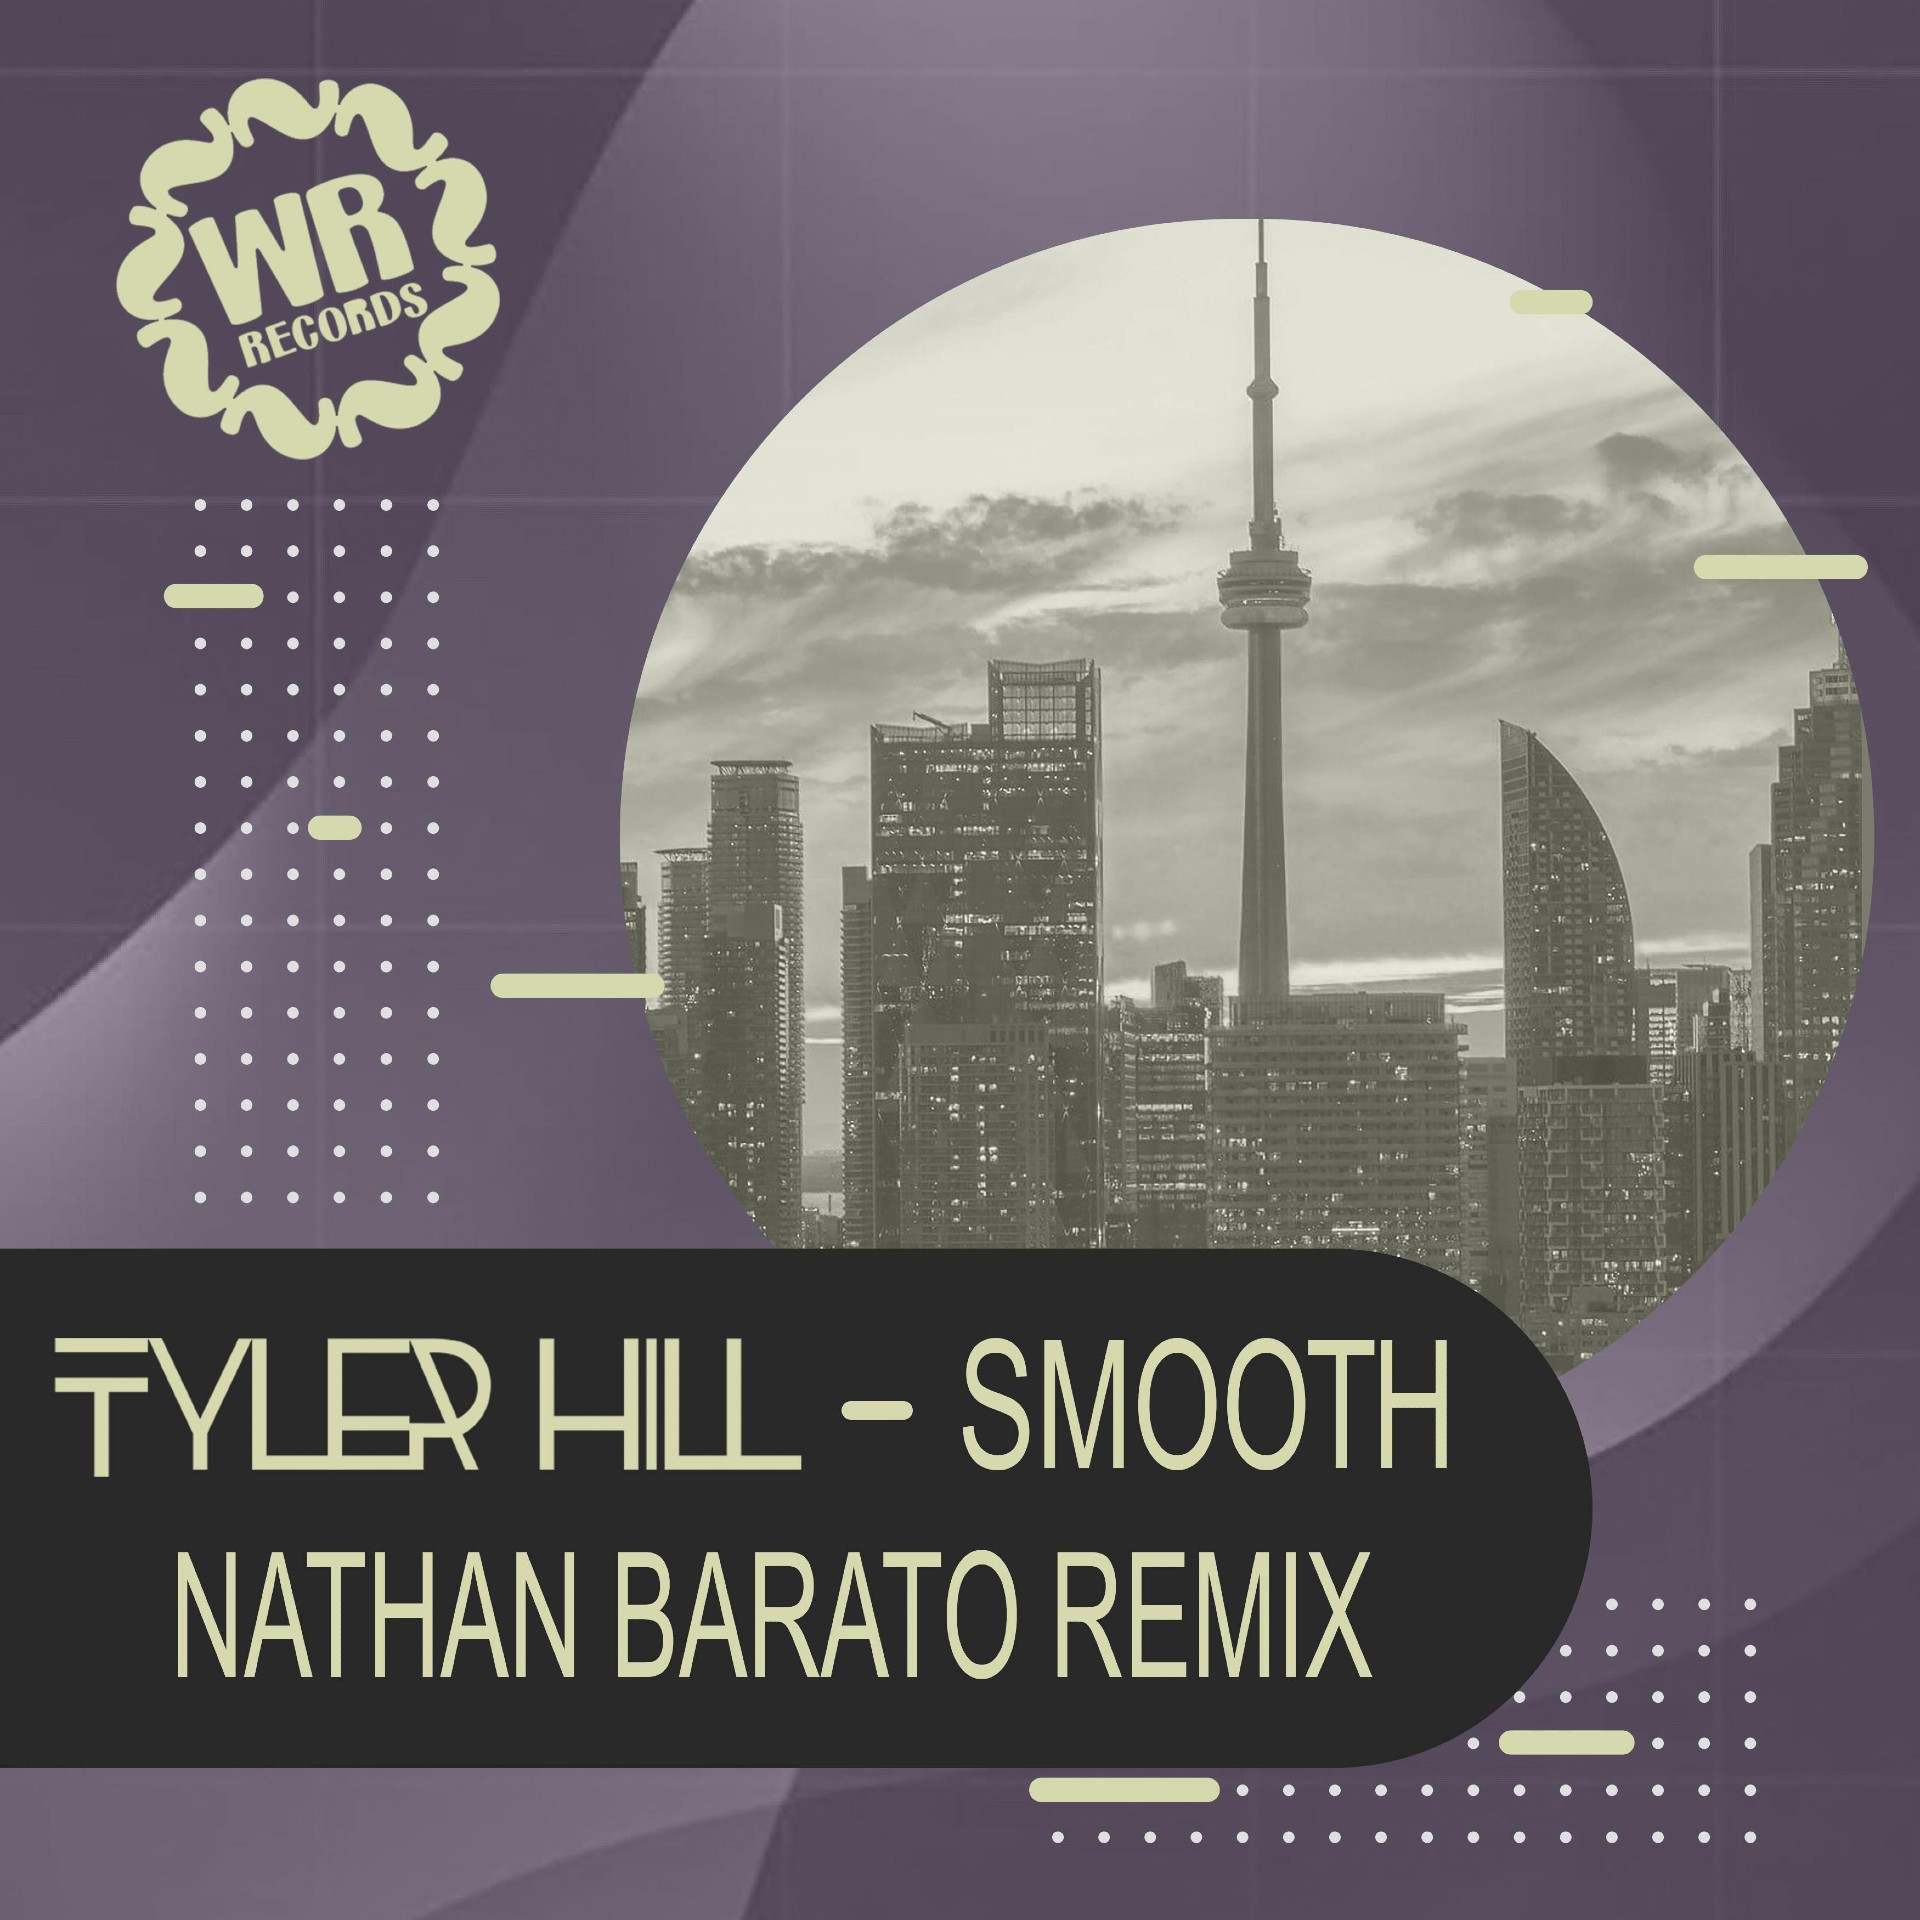 Artwork for the single “Smooth” (Nathan Barato Remix) by Tyler Hill